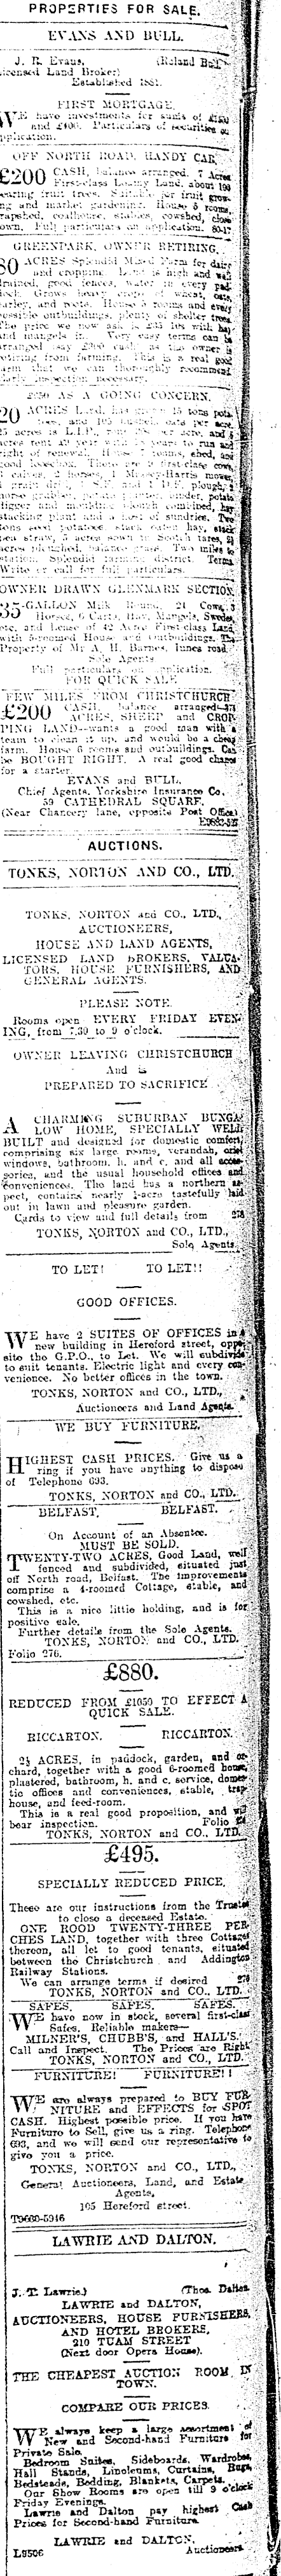 Papers Past Newspapers Press 10 July 1915 Page 16 Advertisements Column 8